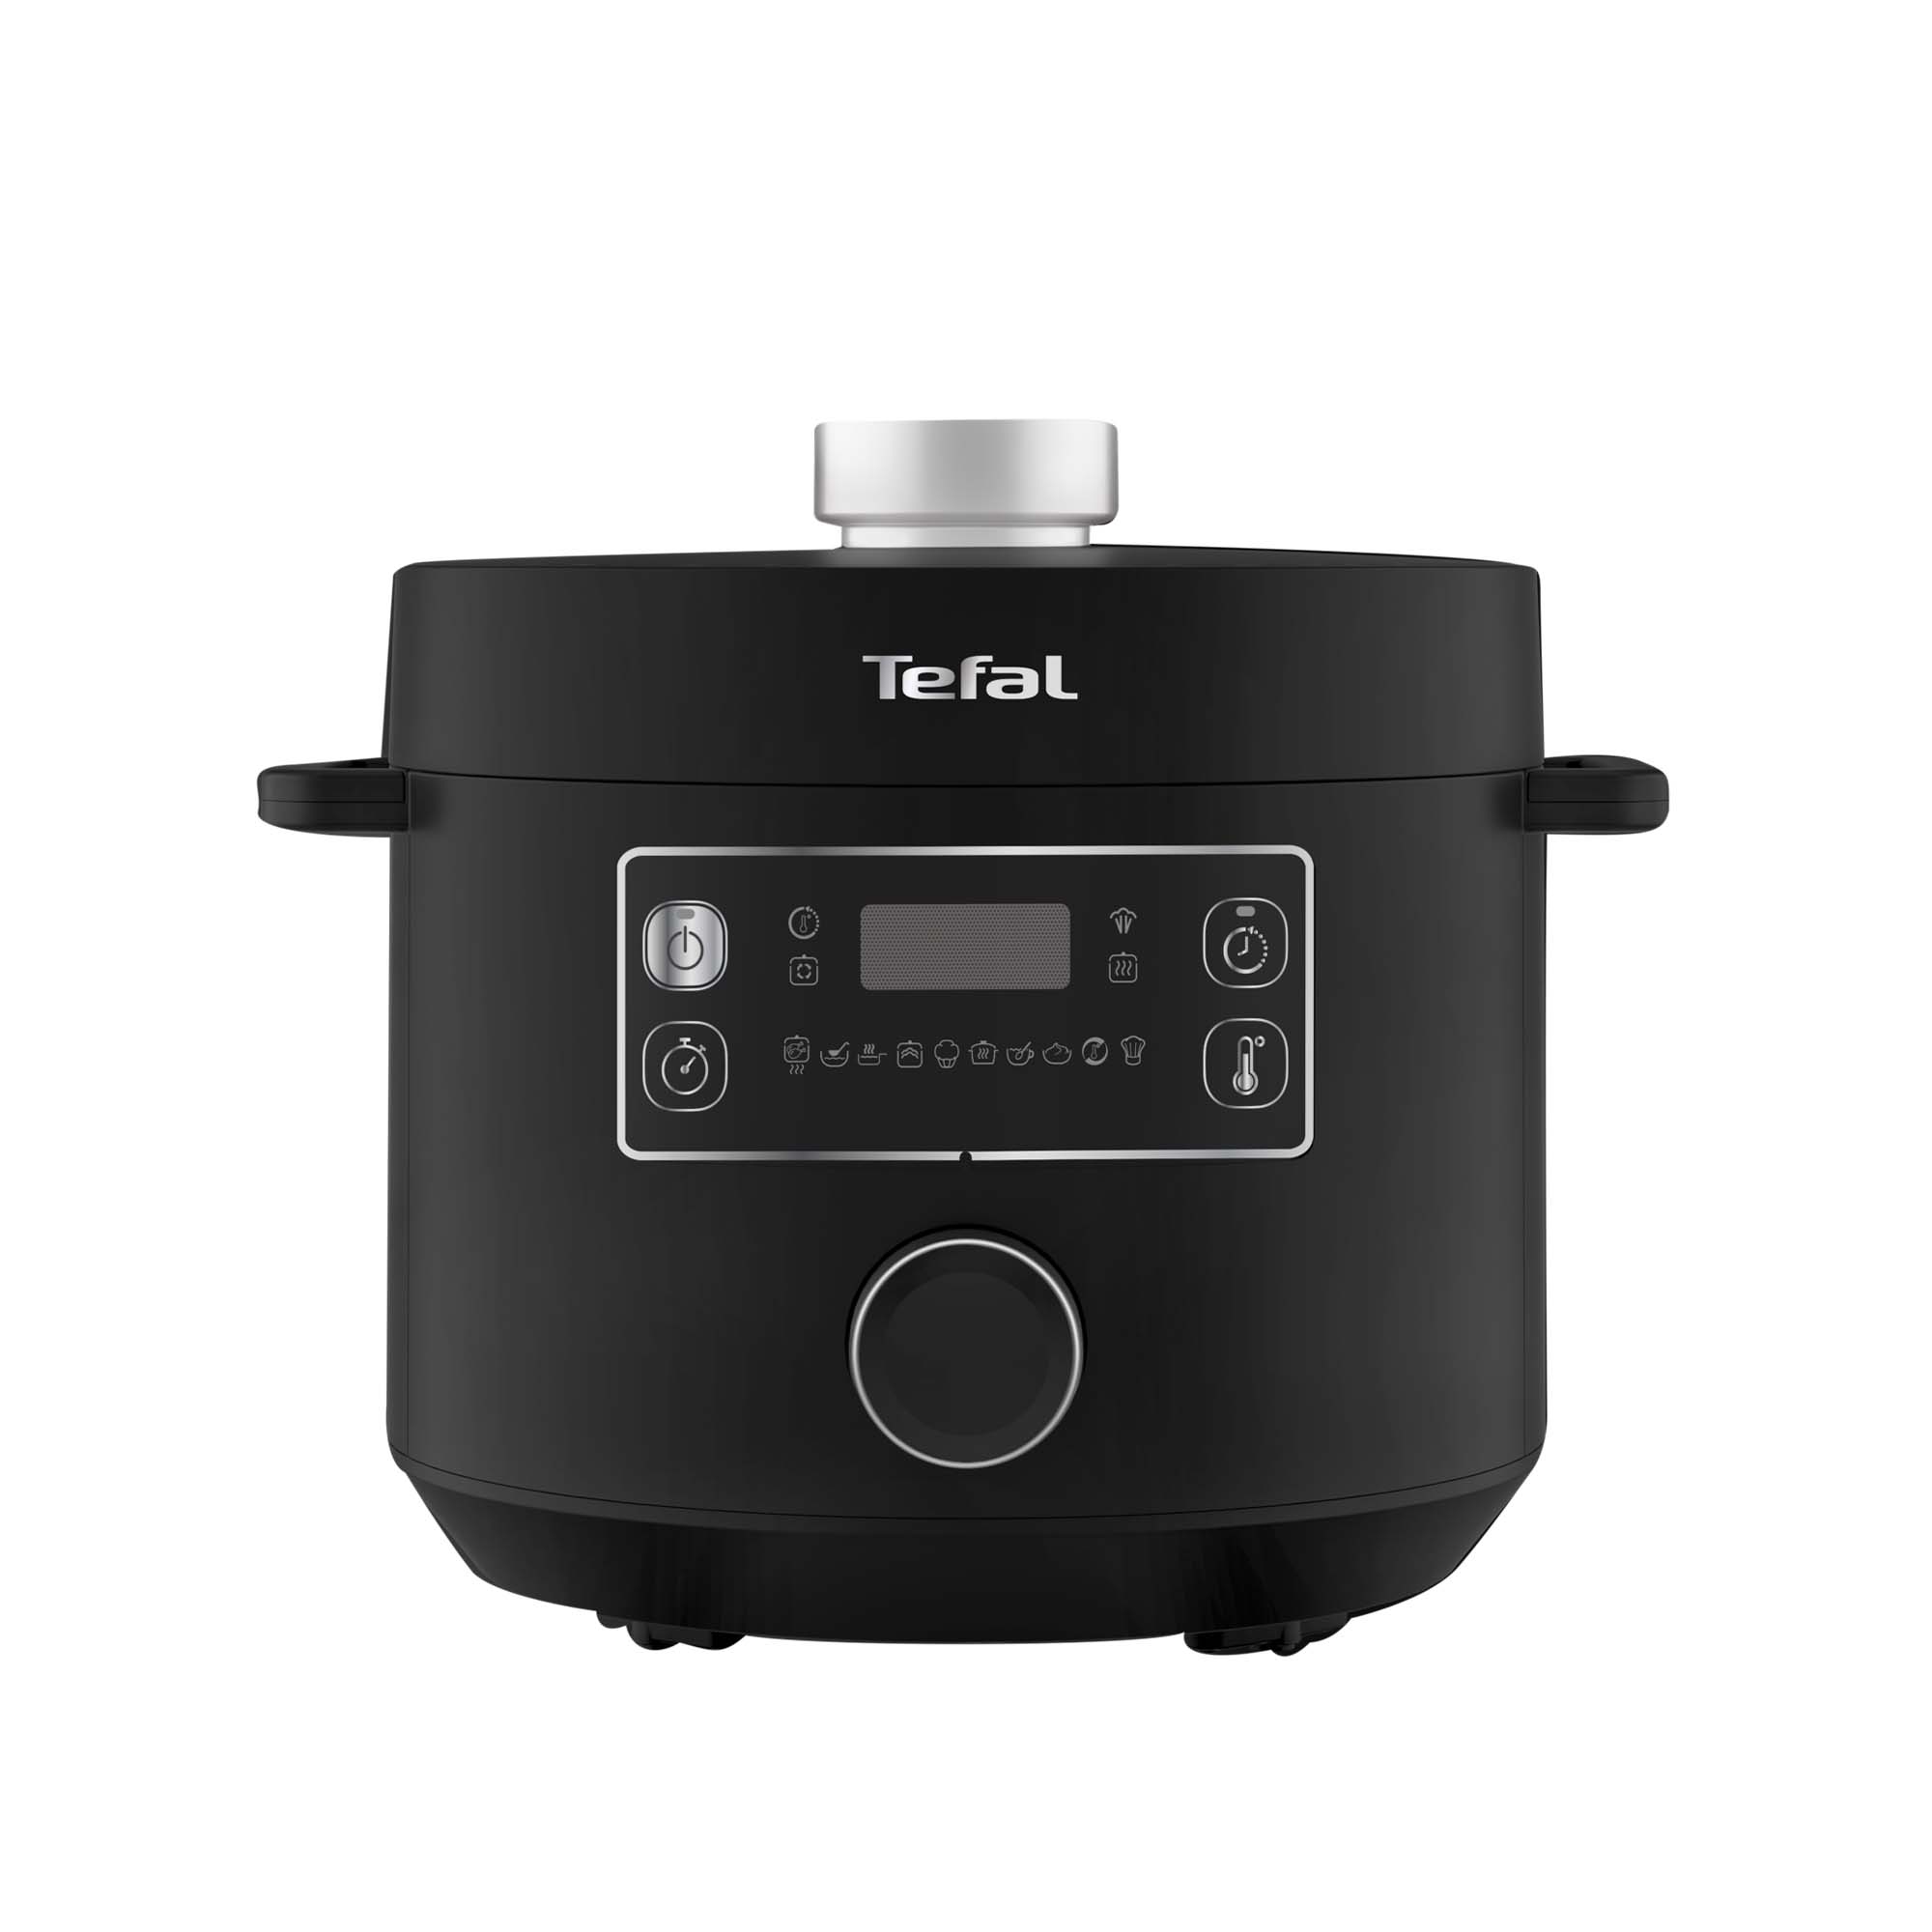 how to use tefal pressure cooker the right way